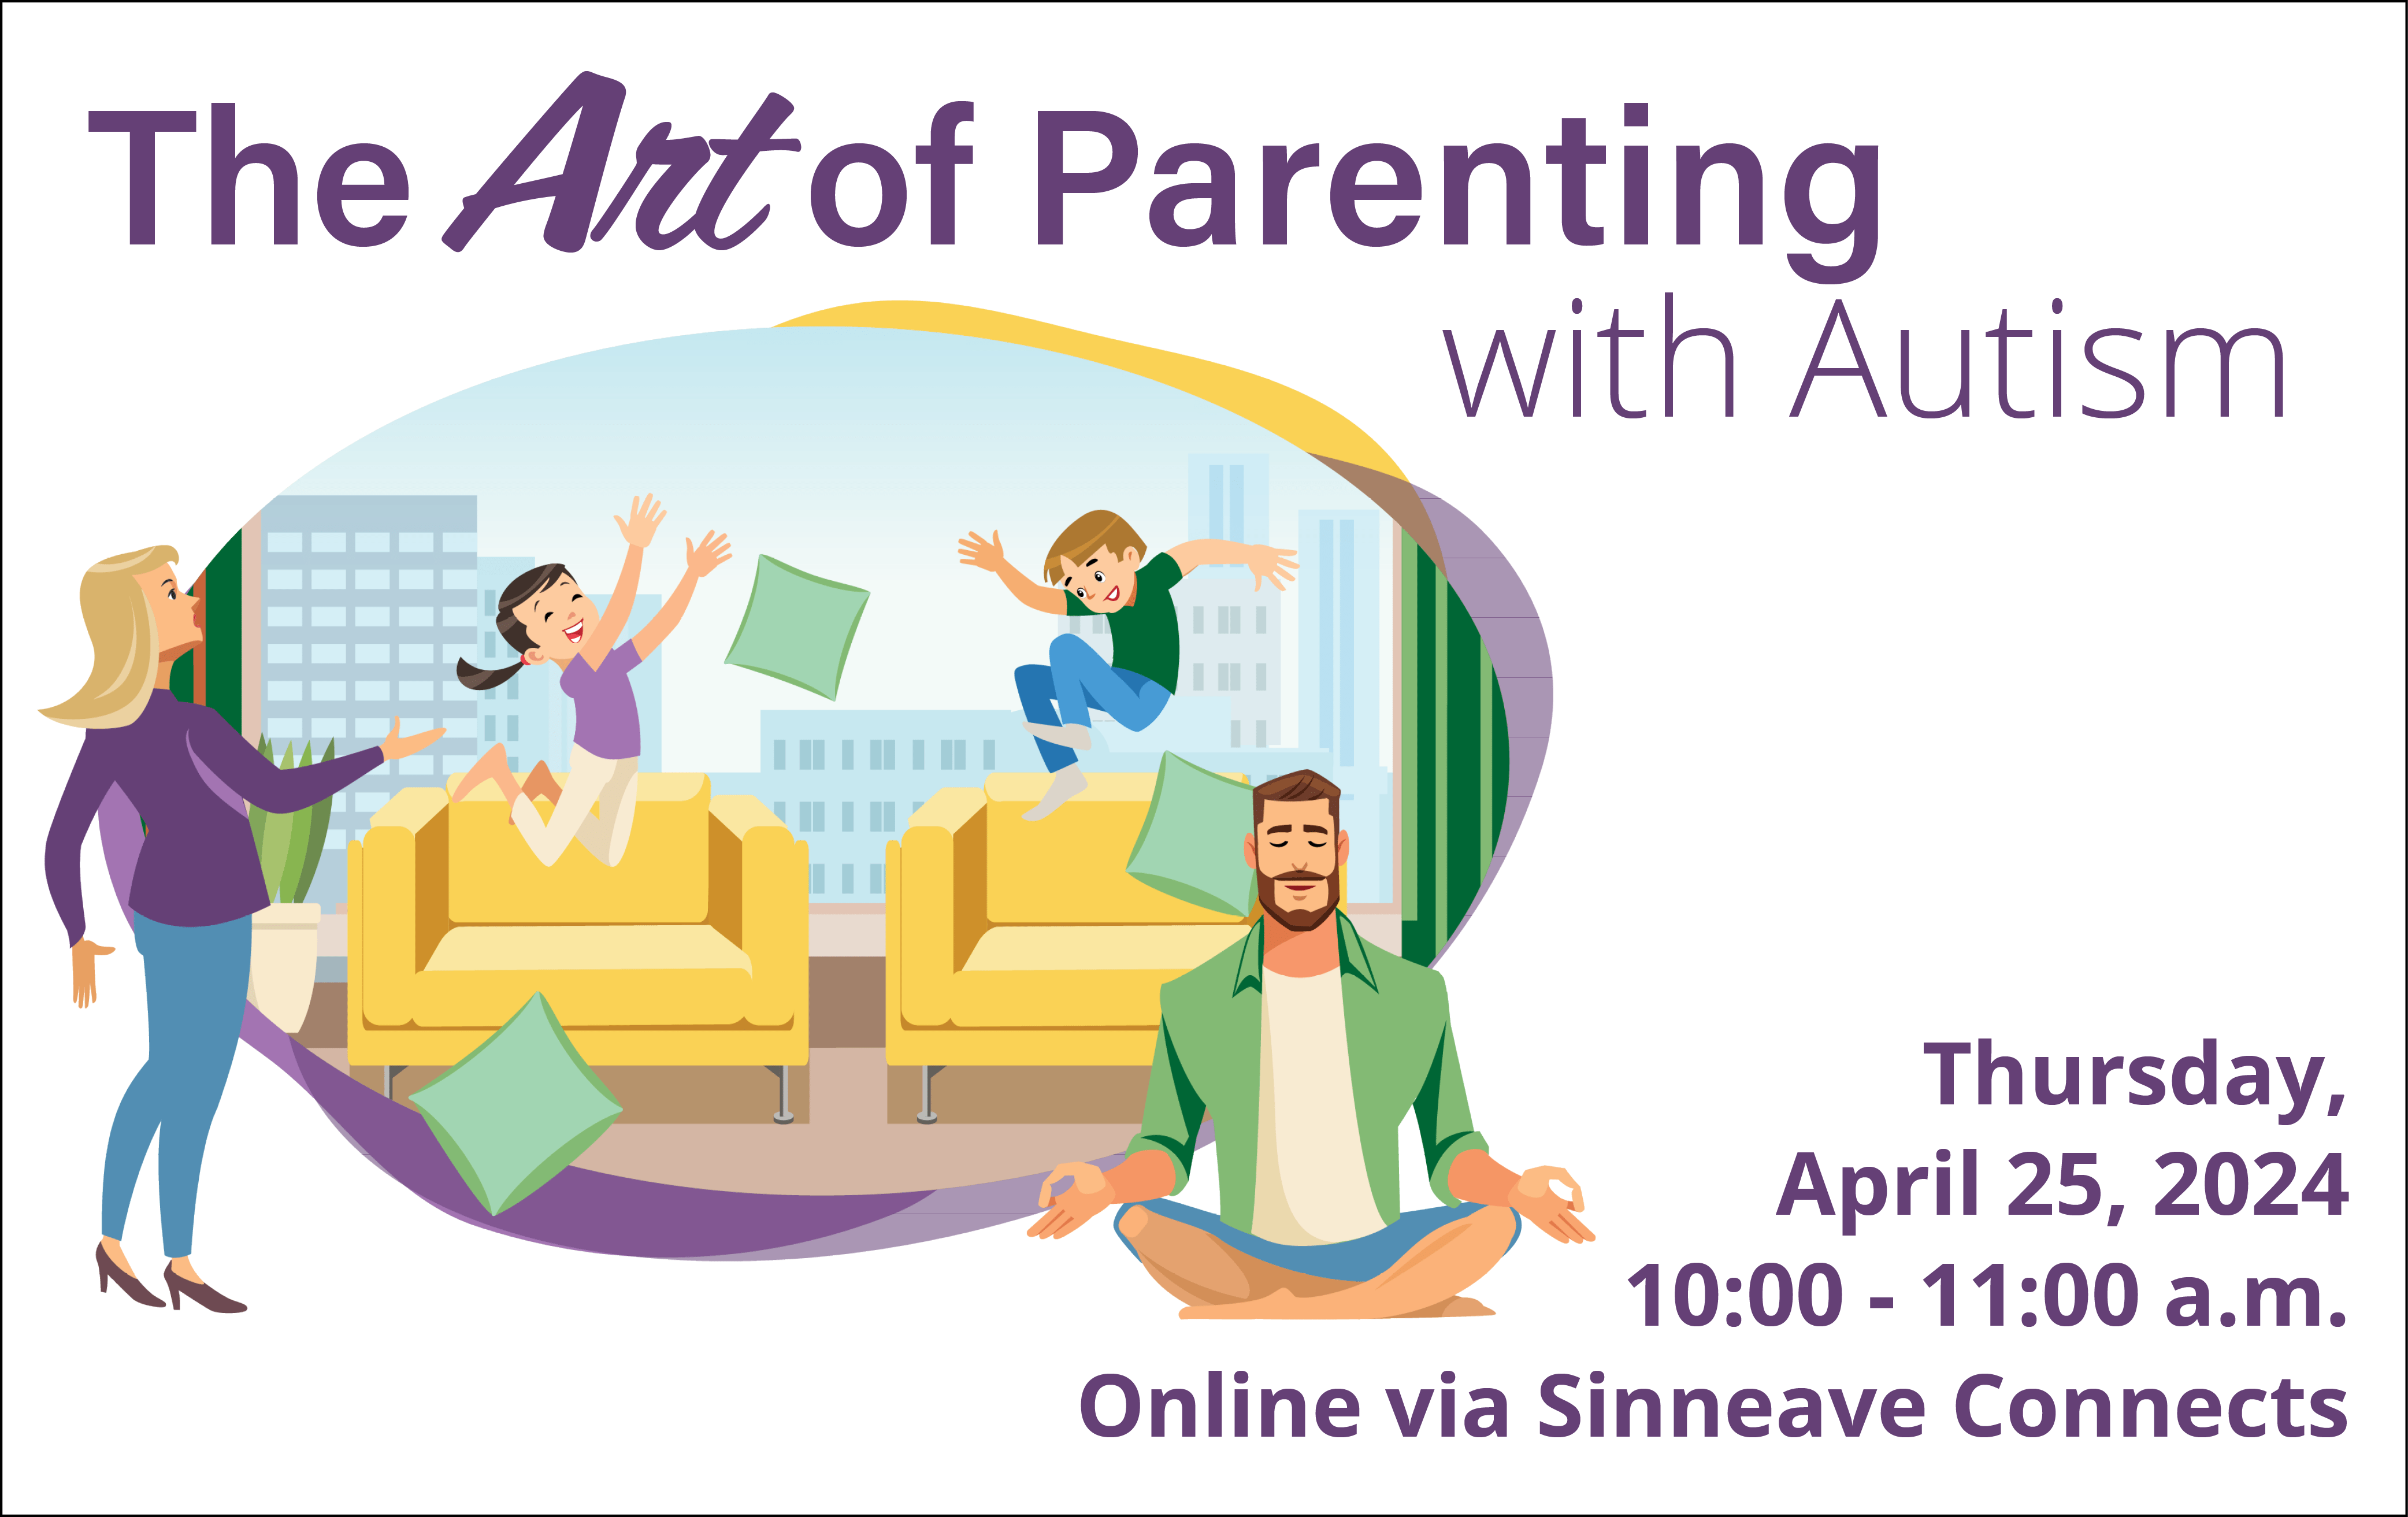 On a white background, the title at the top of the image reads, "The Art of Parenting with Autism" On the left is an image depicting a family together. In the bottom right of the image reads, "Thursday, April 24 from 10 am to 11 am Online on Sinneave Connects."